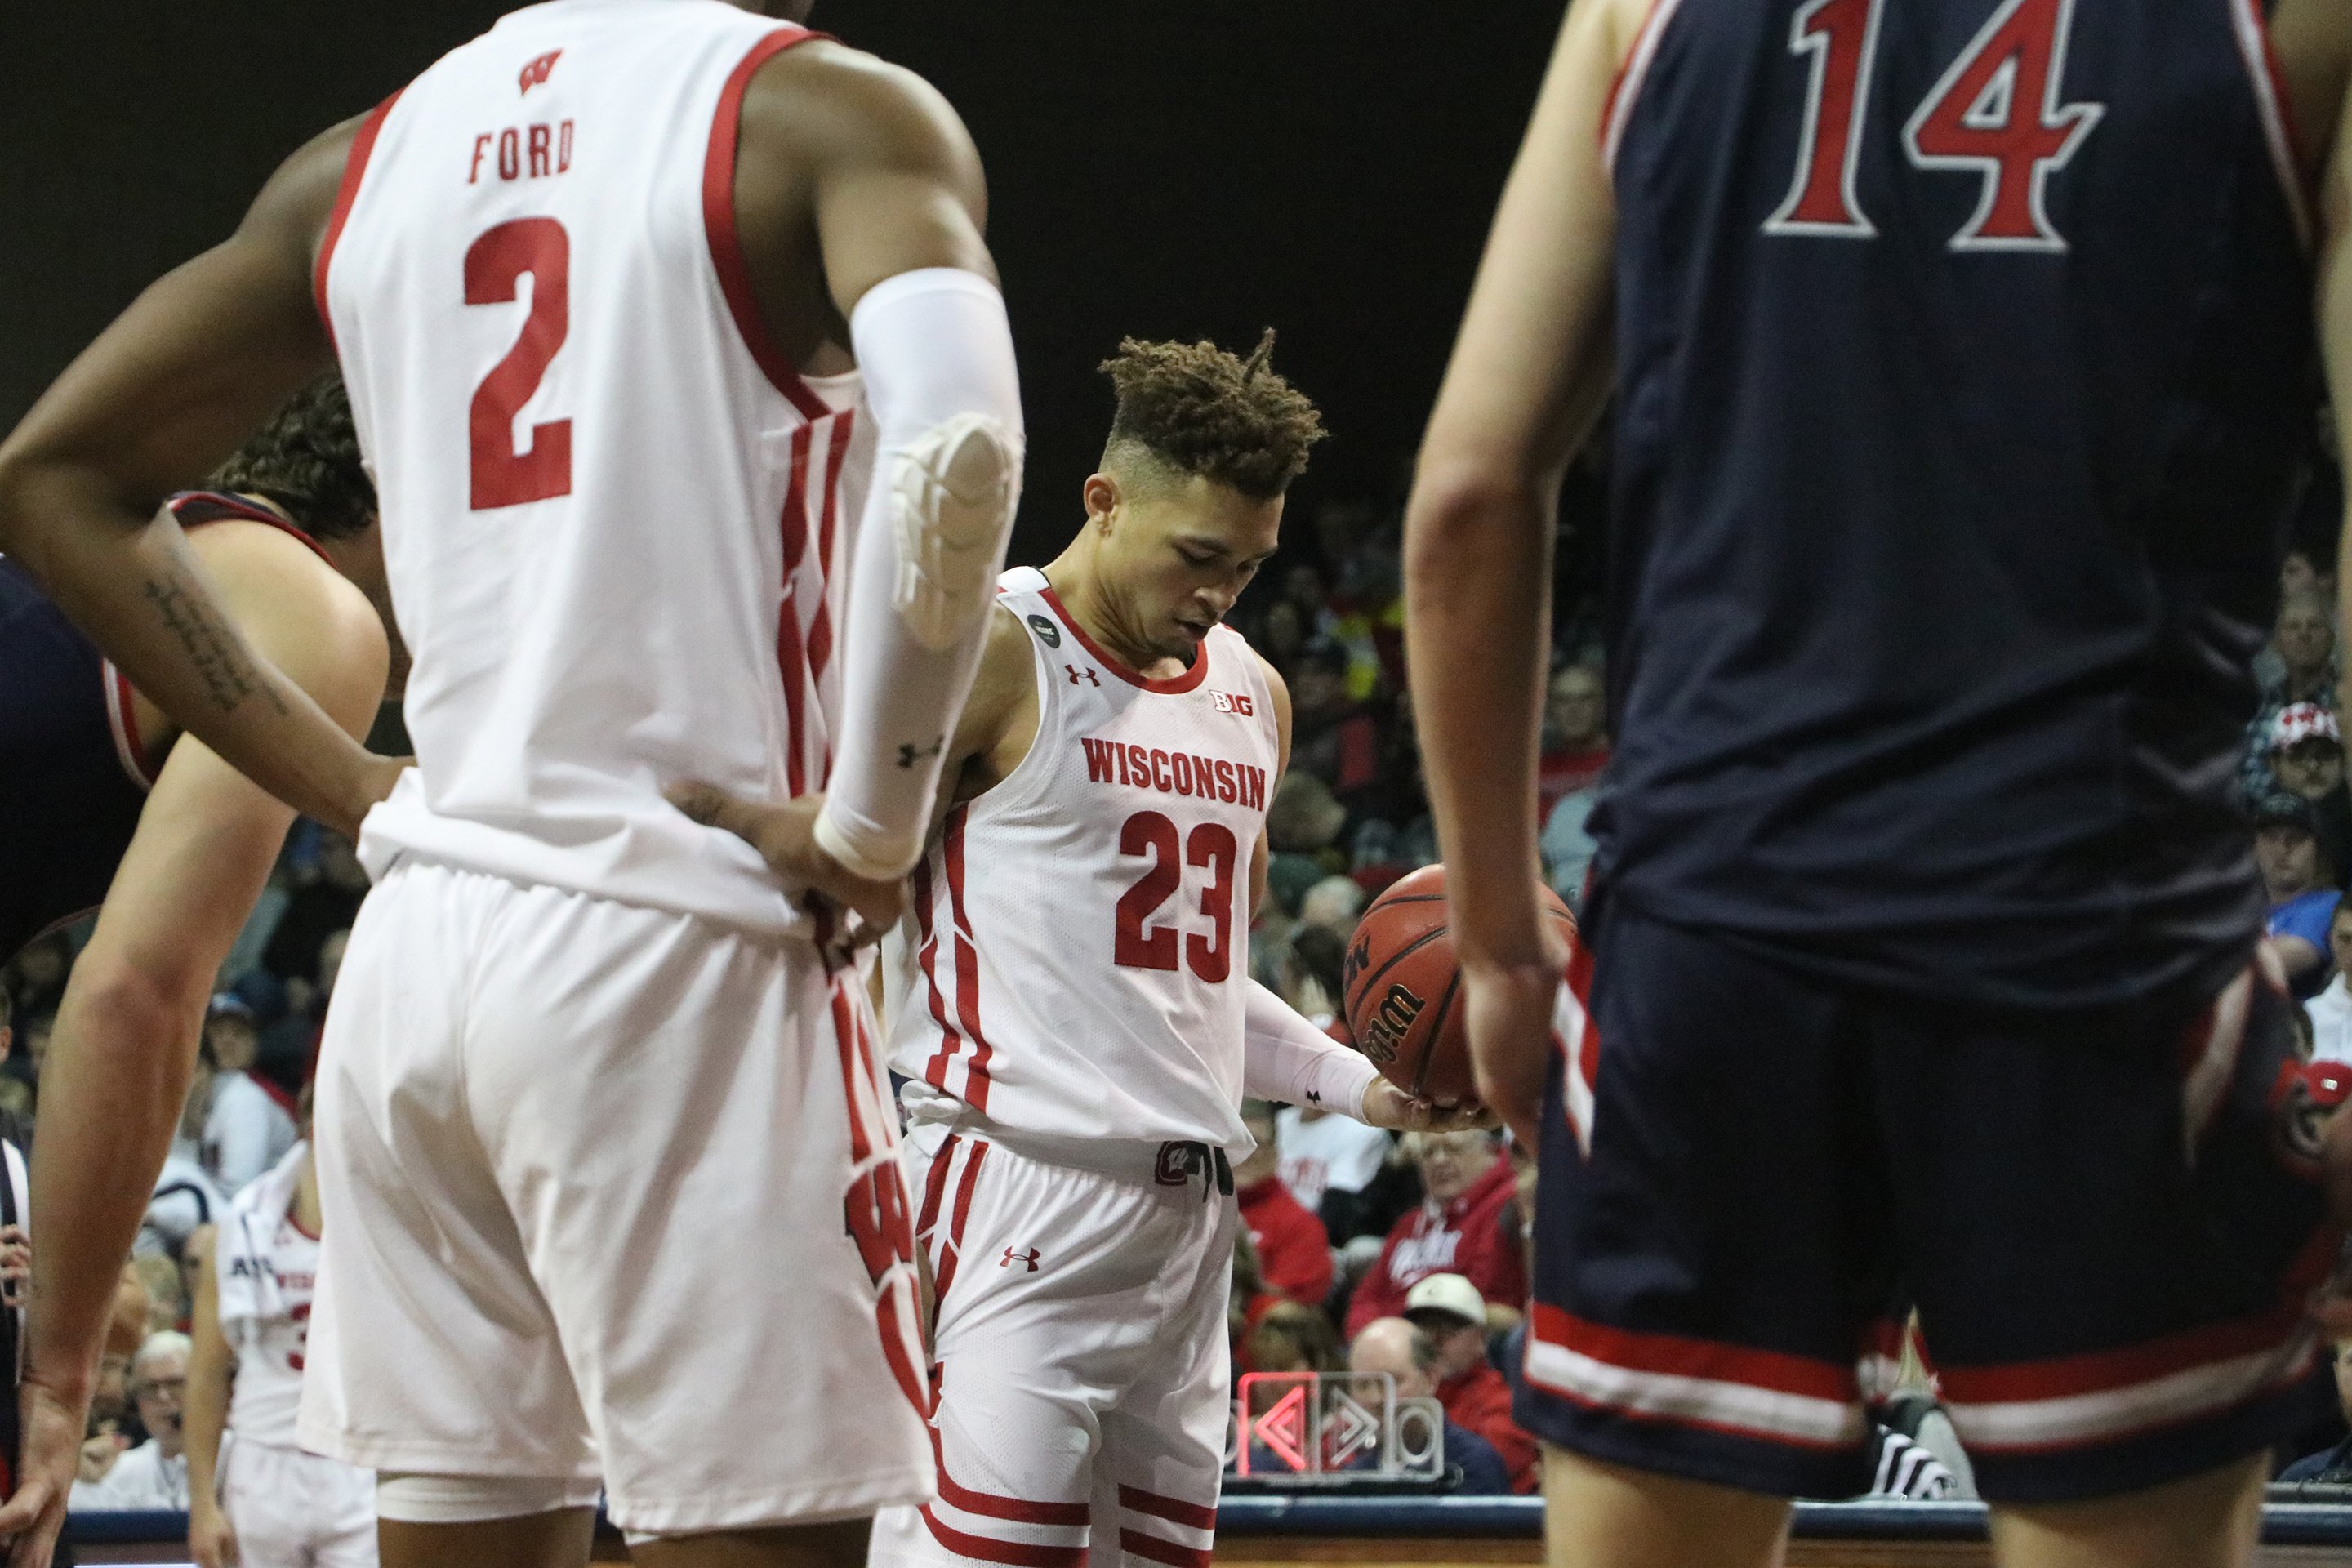 After blowout loss, Badgers head to No. 19 Iowa on Monday